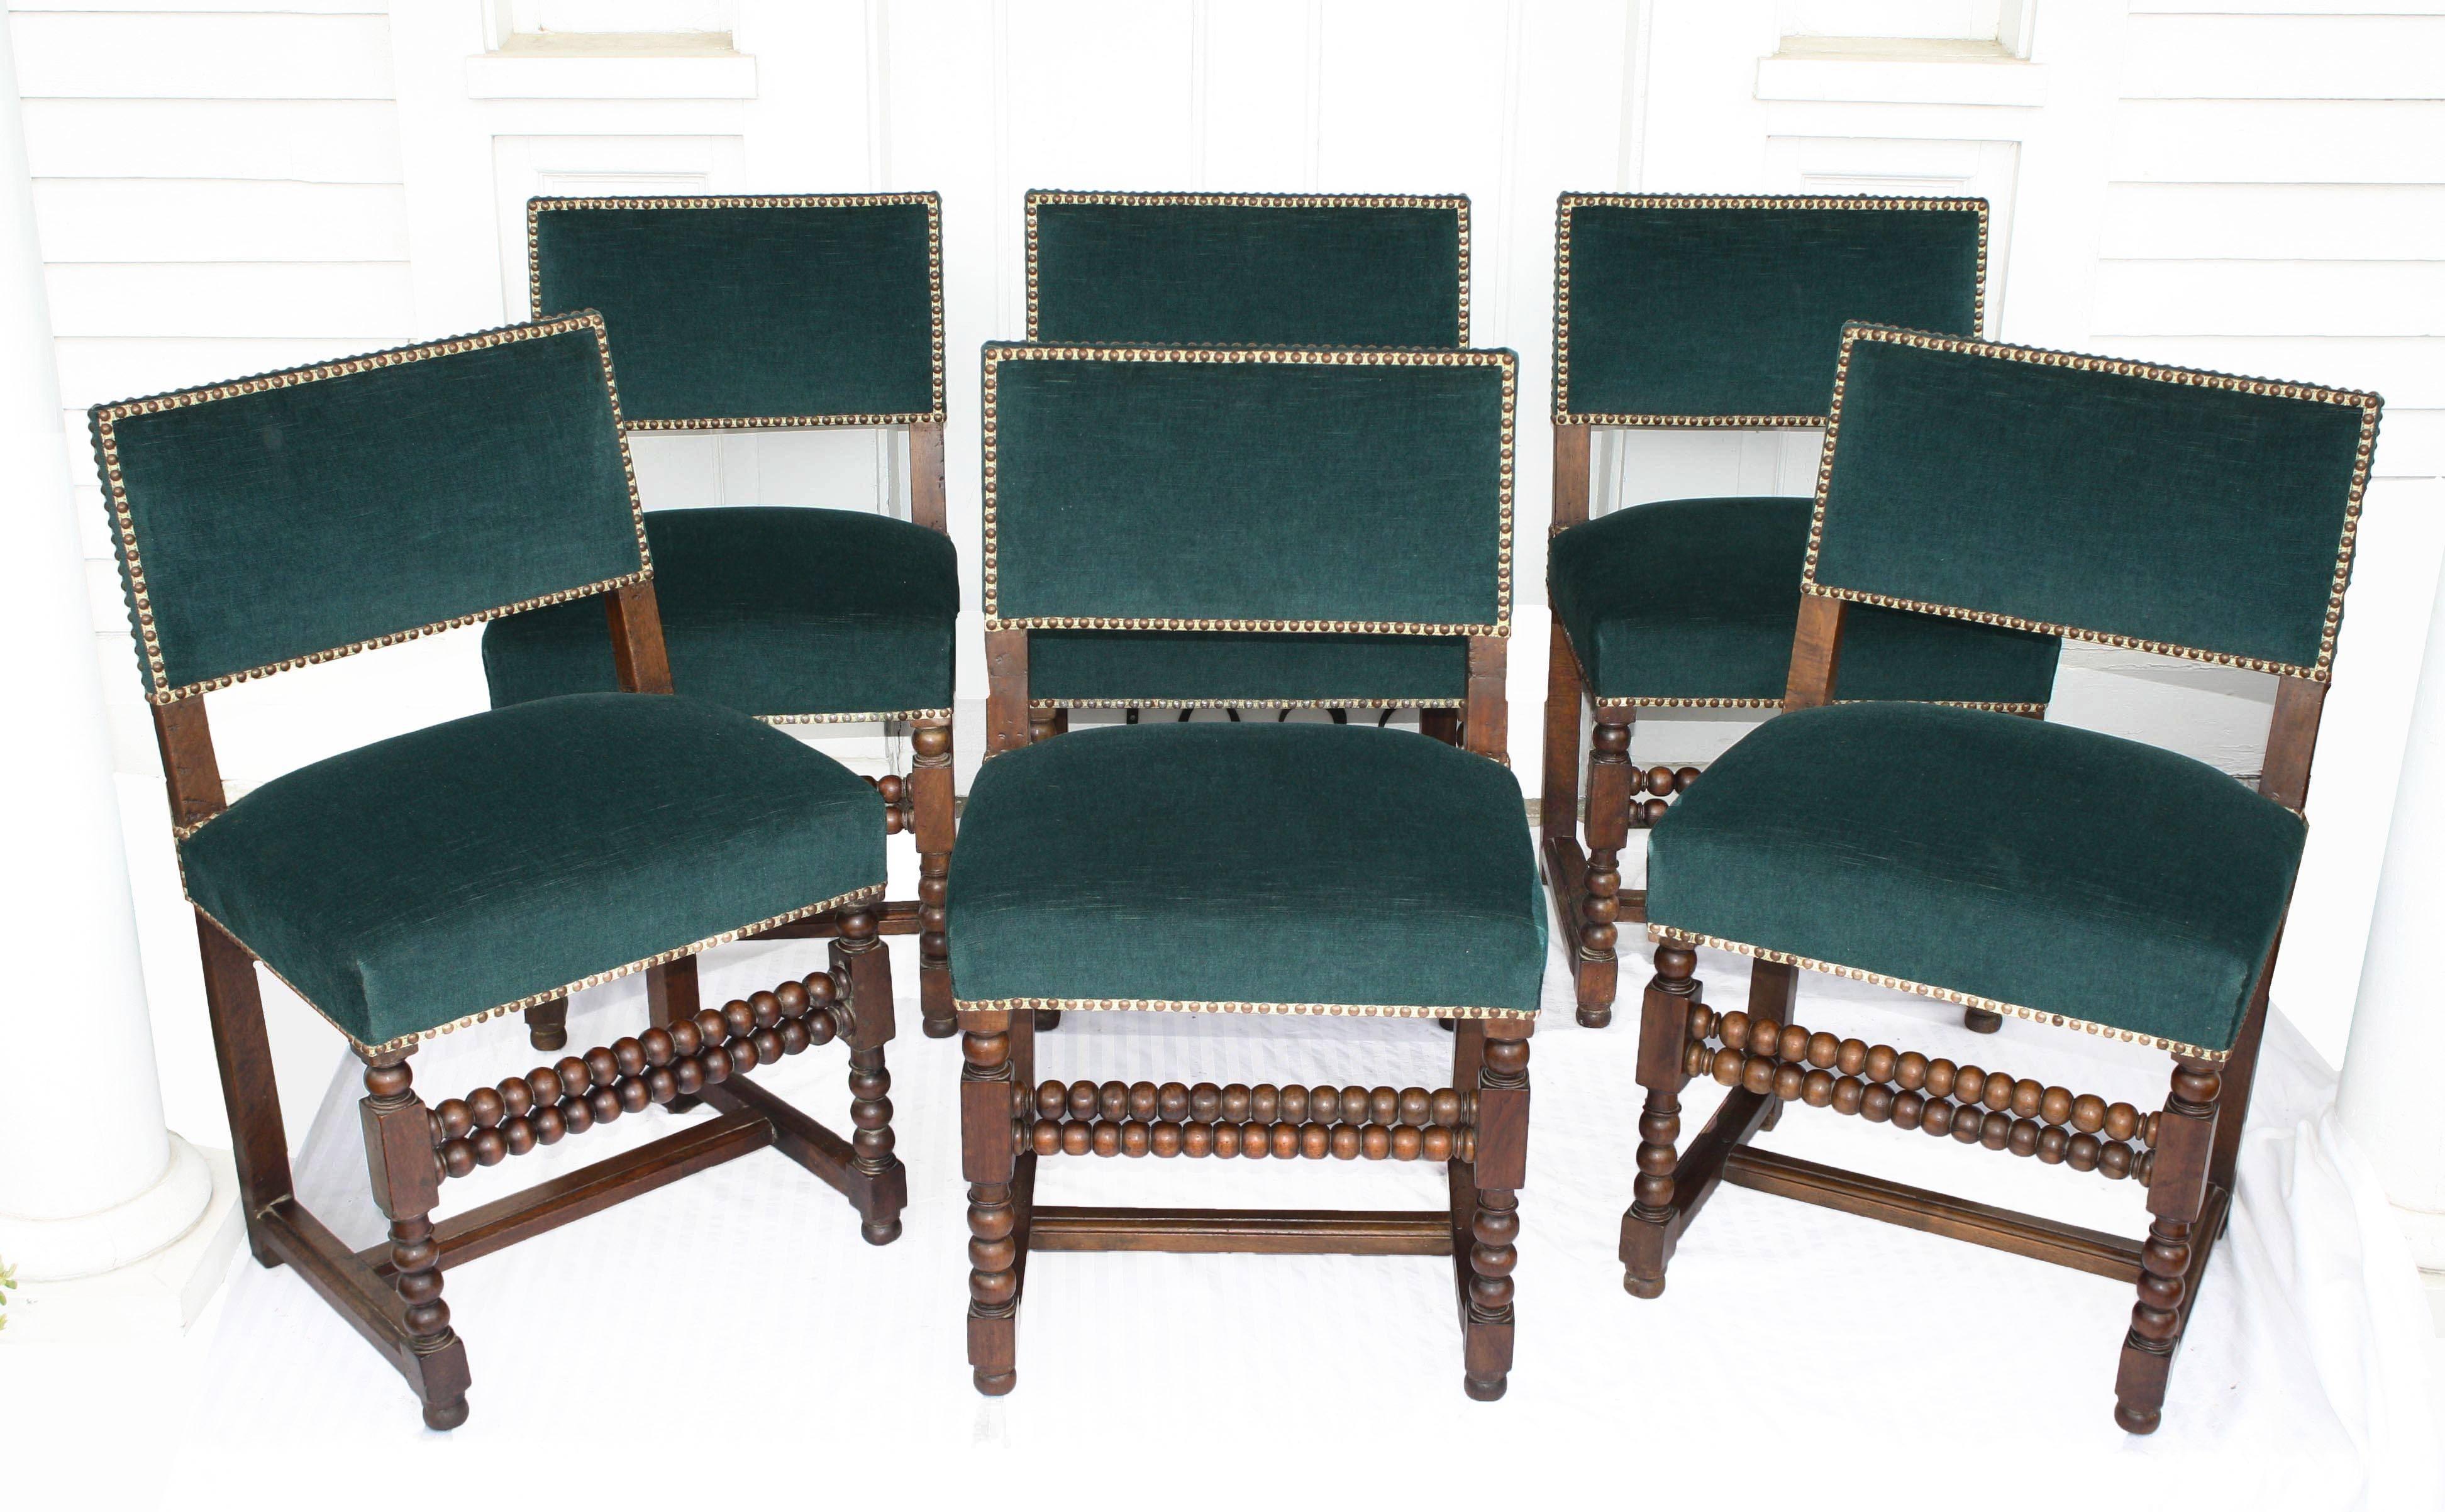 An extraordinary set of six mid-17th century Louis XIII late Renaissance period dining side chairs. Hand-turned and carved oak, dual turned front stretchers, flat H-stretchers, and solid planed oak back-boards; recently re-upholstered to today's